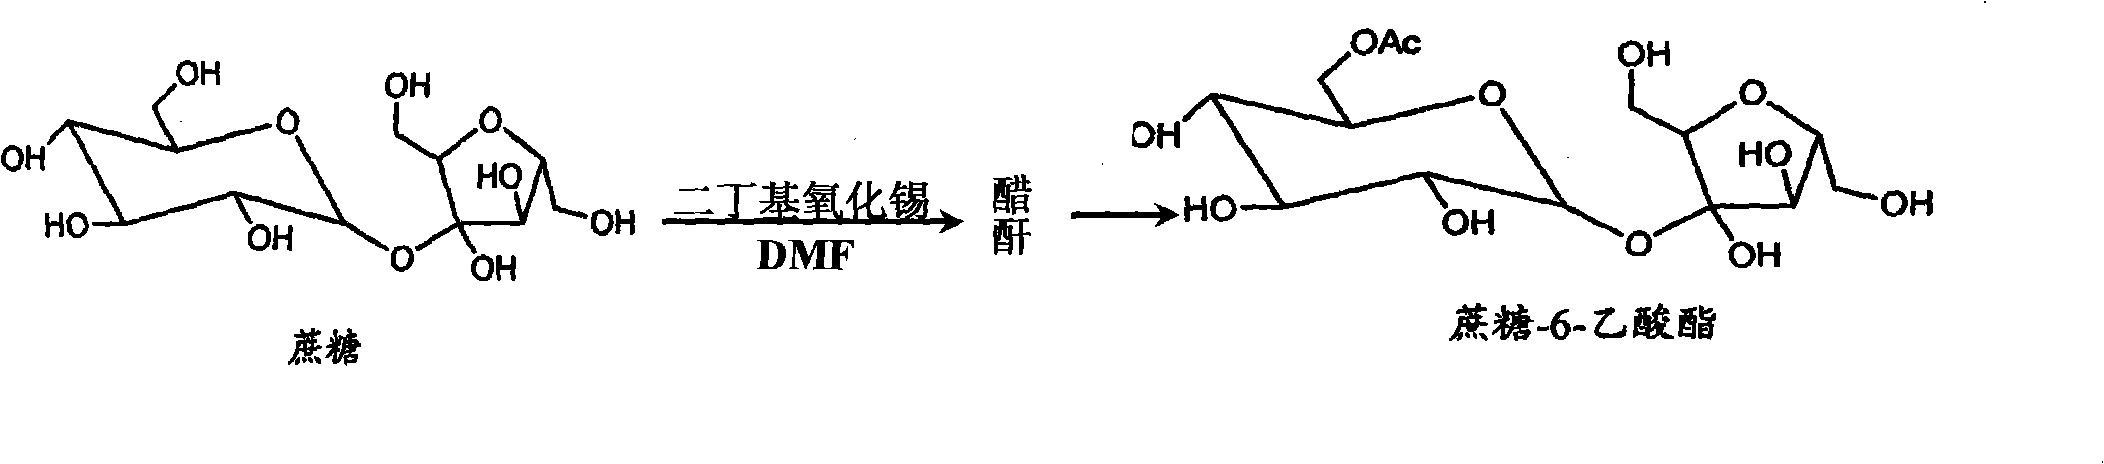 Synthetic method for sucralose